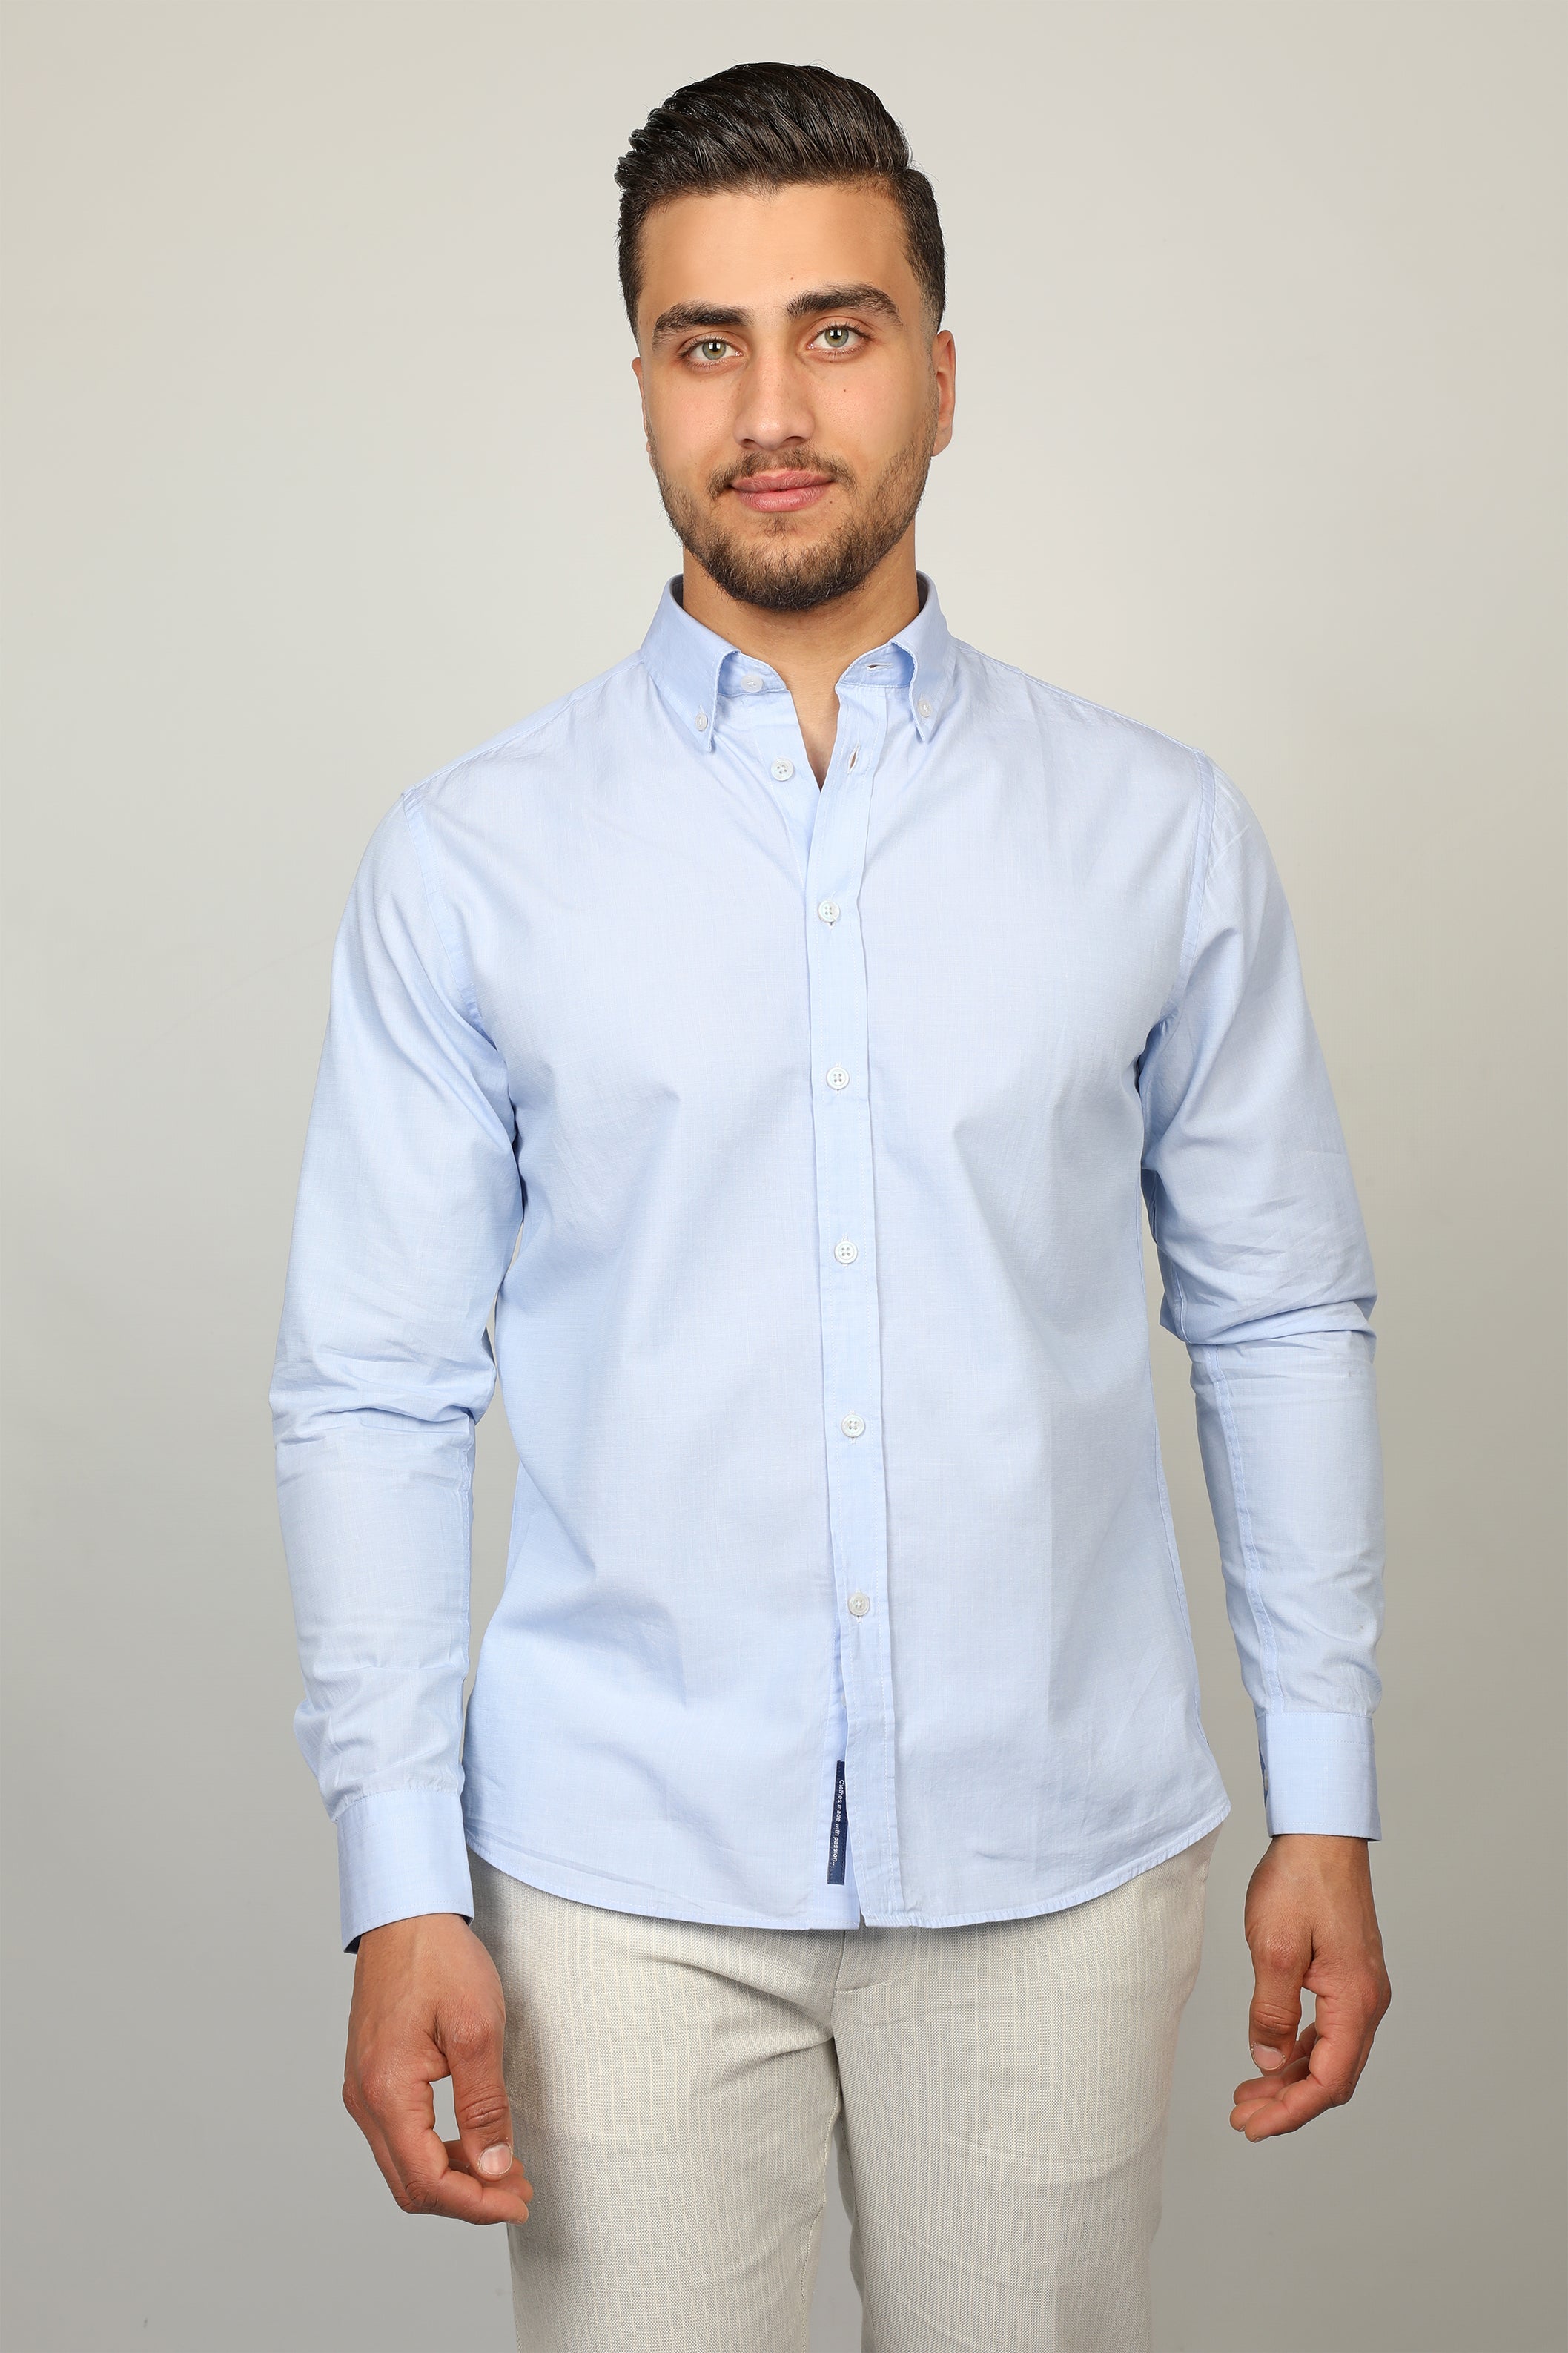 Casual Blue Shirt With White Buttons